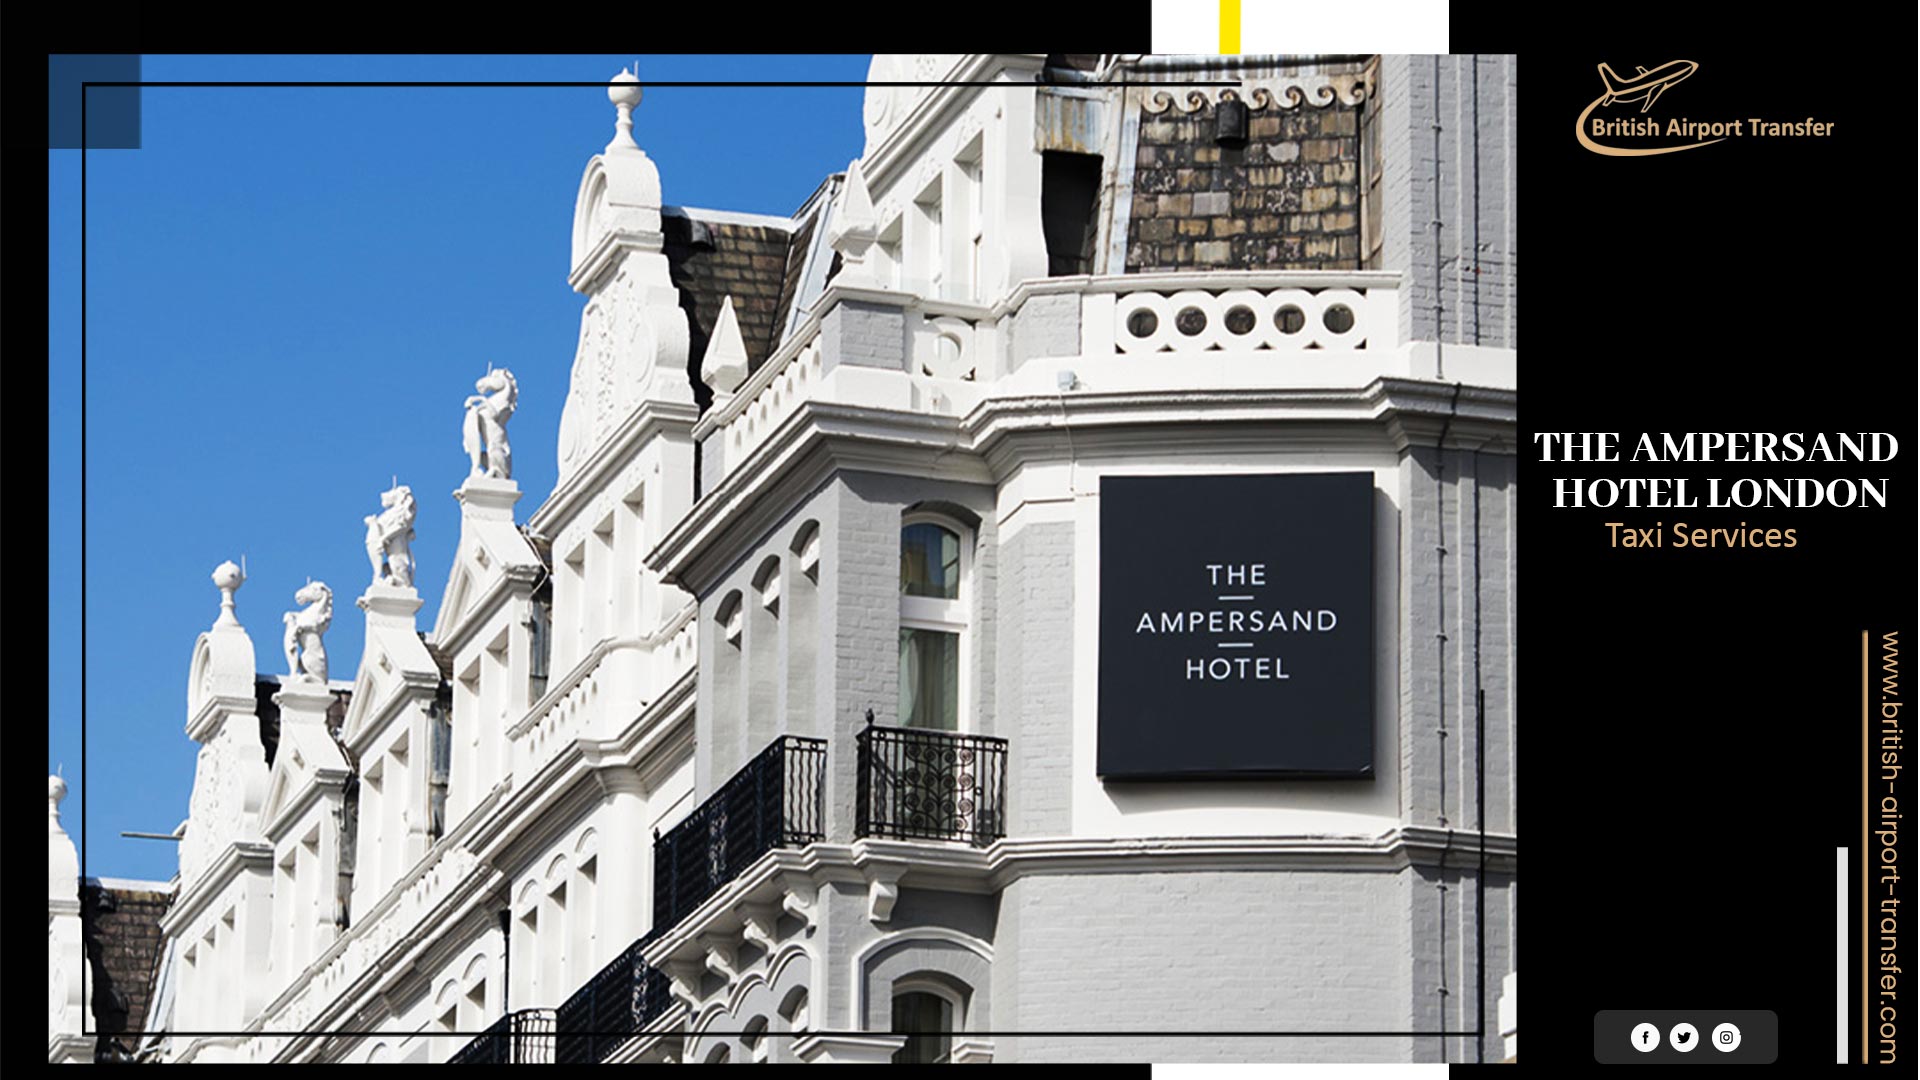 Taxi Cab – The Ampersand Hotel London / SW7 3ER